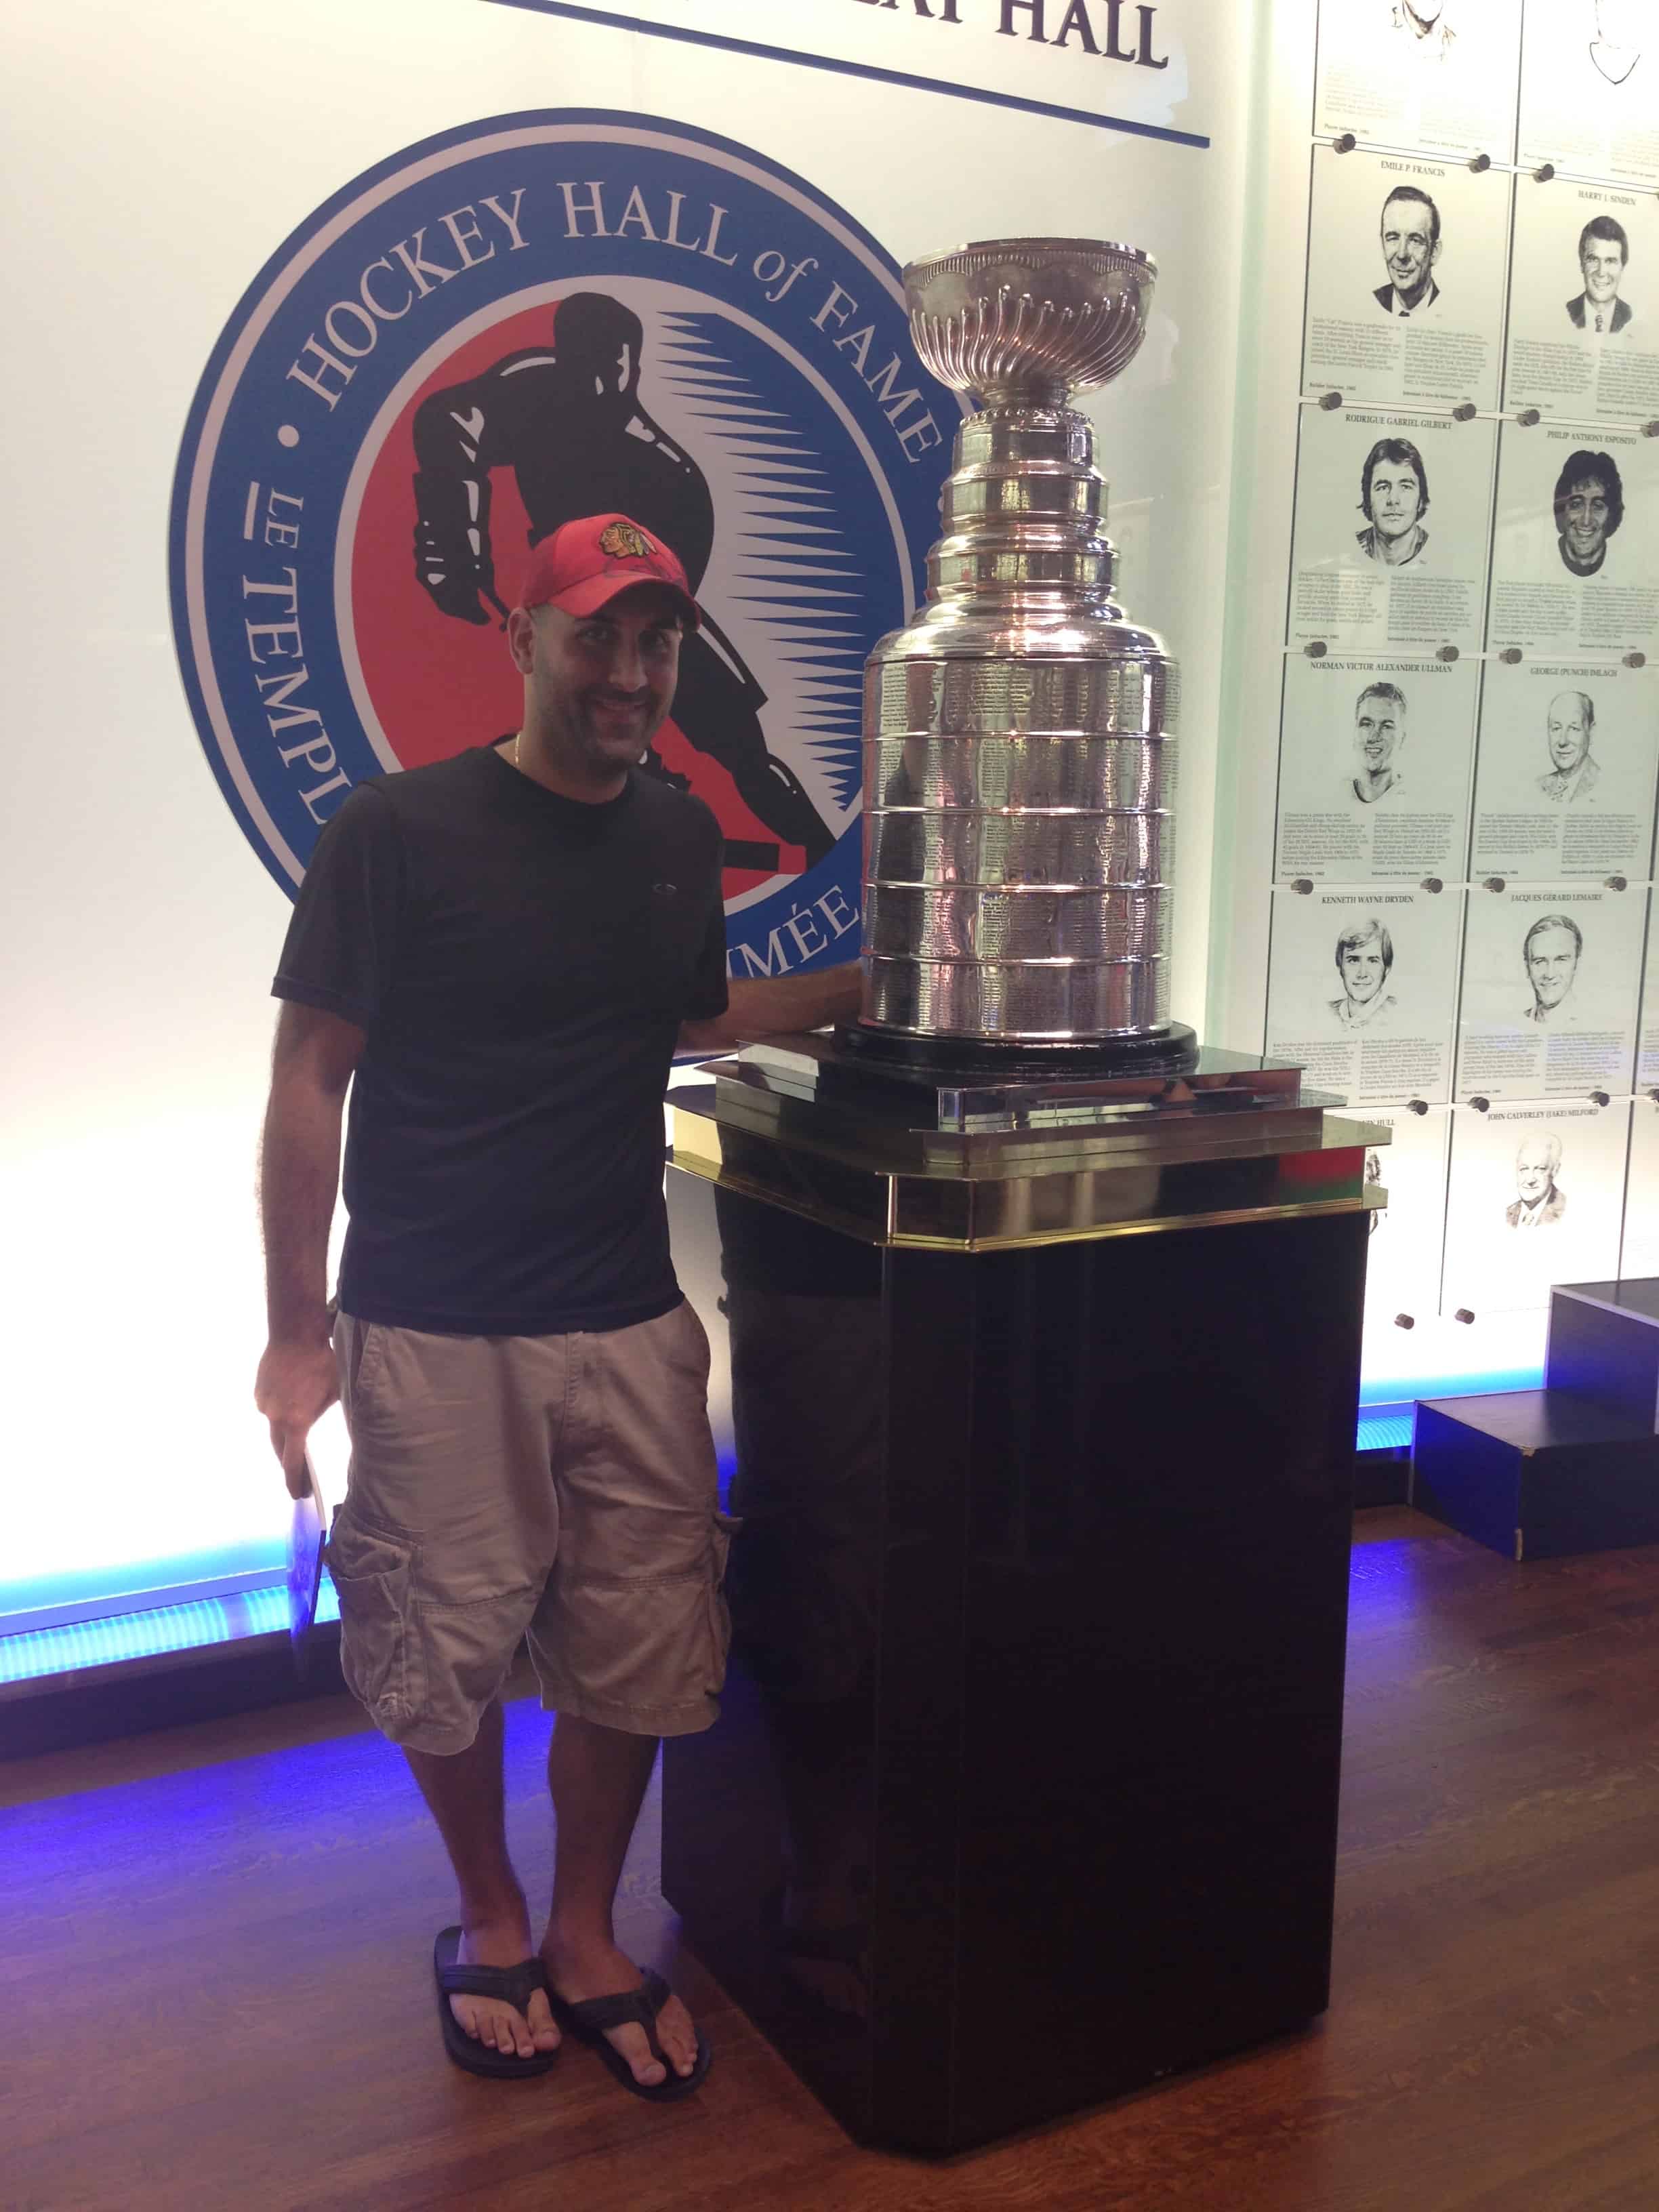 Me with the Stanley Cup at the Hockey Hall of Fame in Toronto, Ontario, Canada